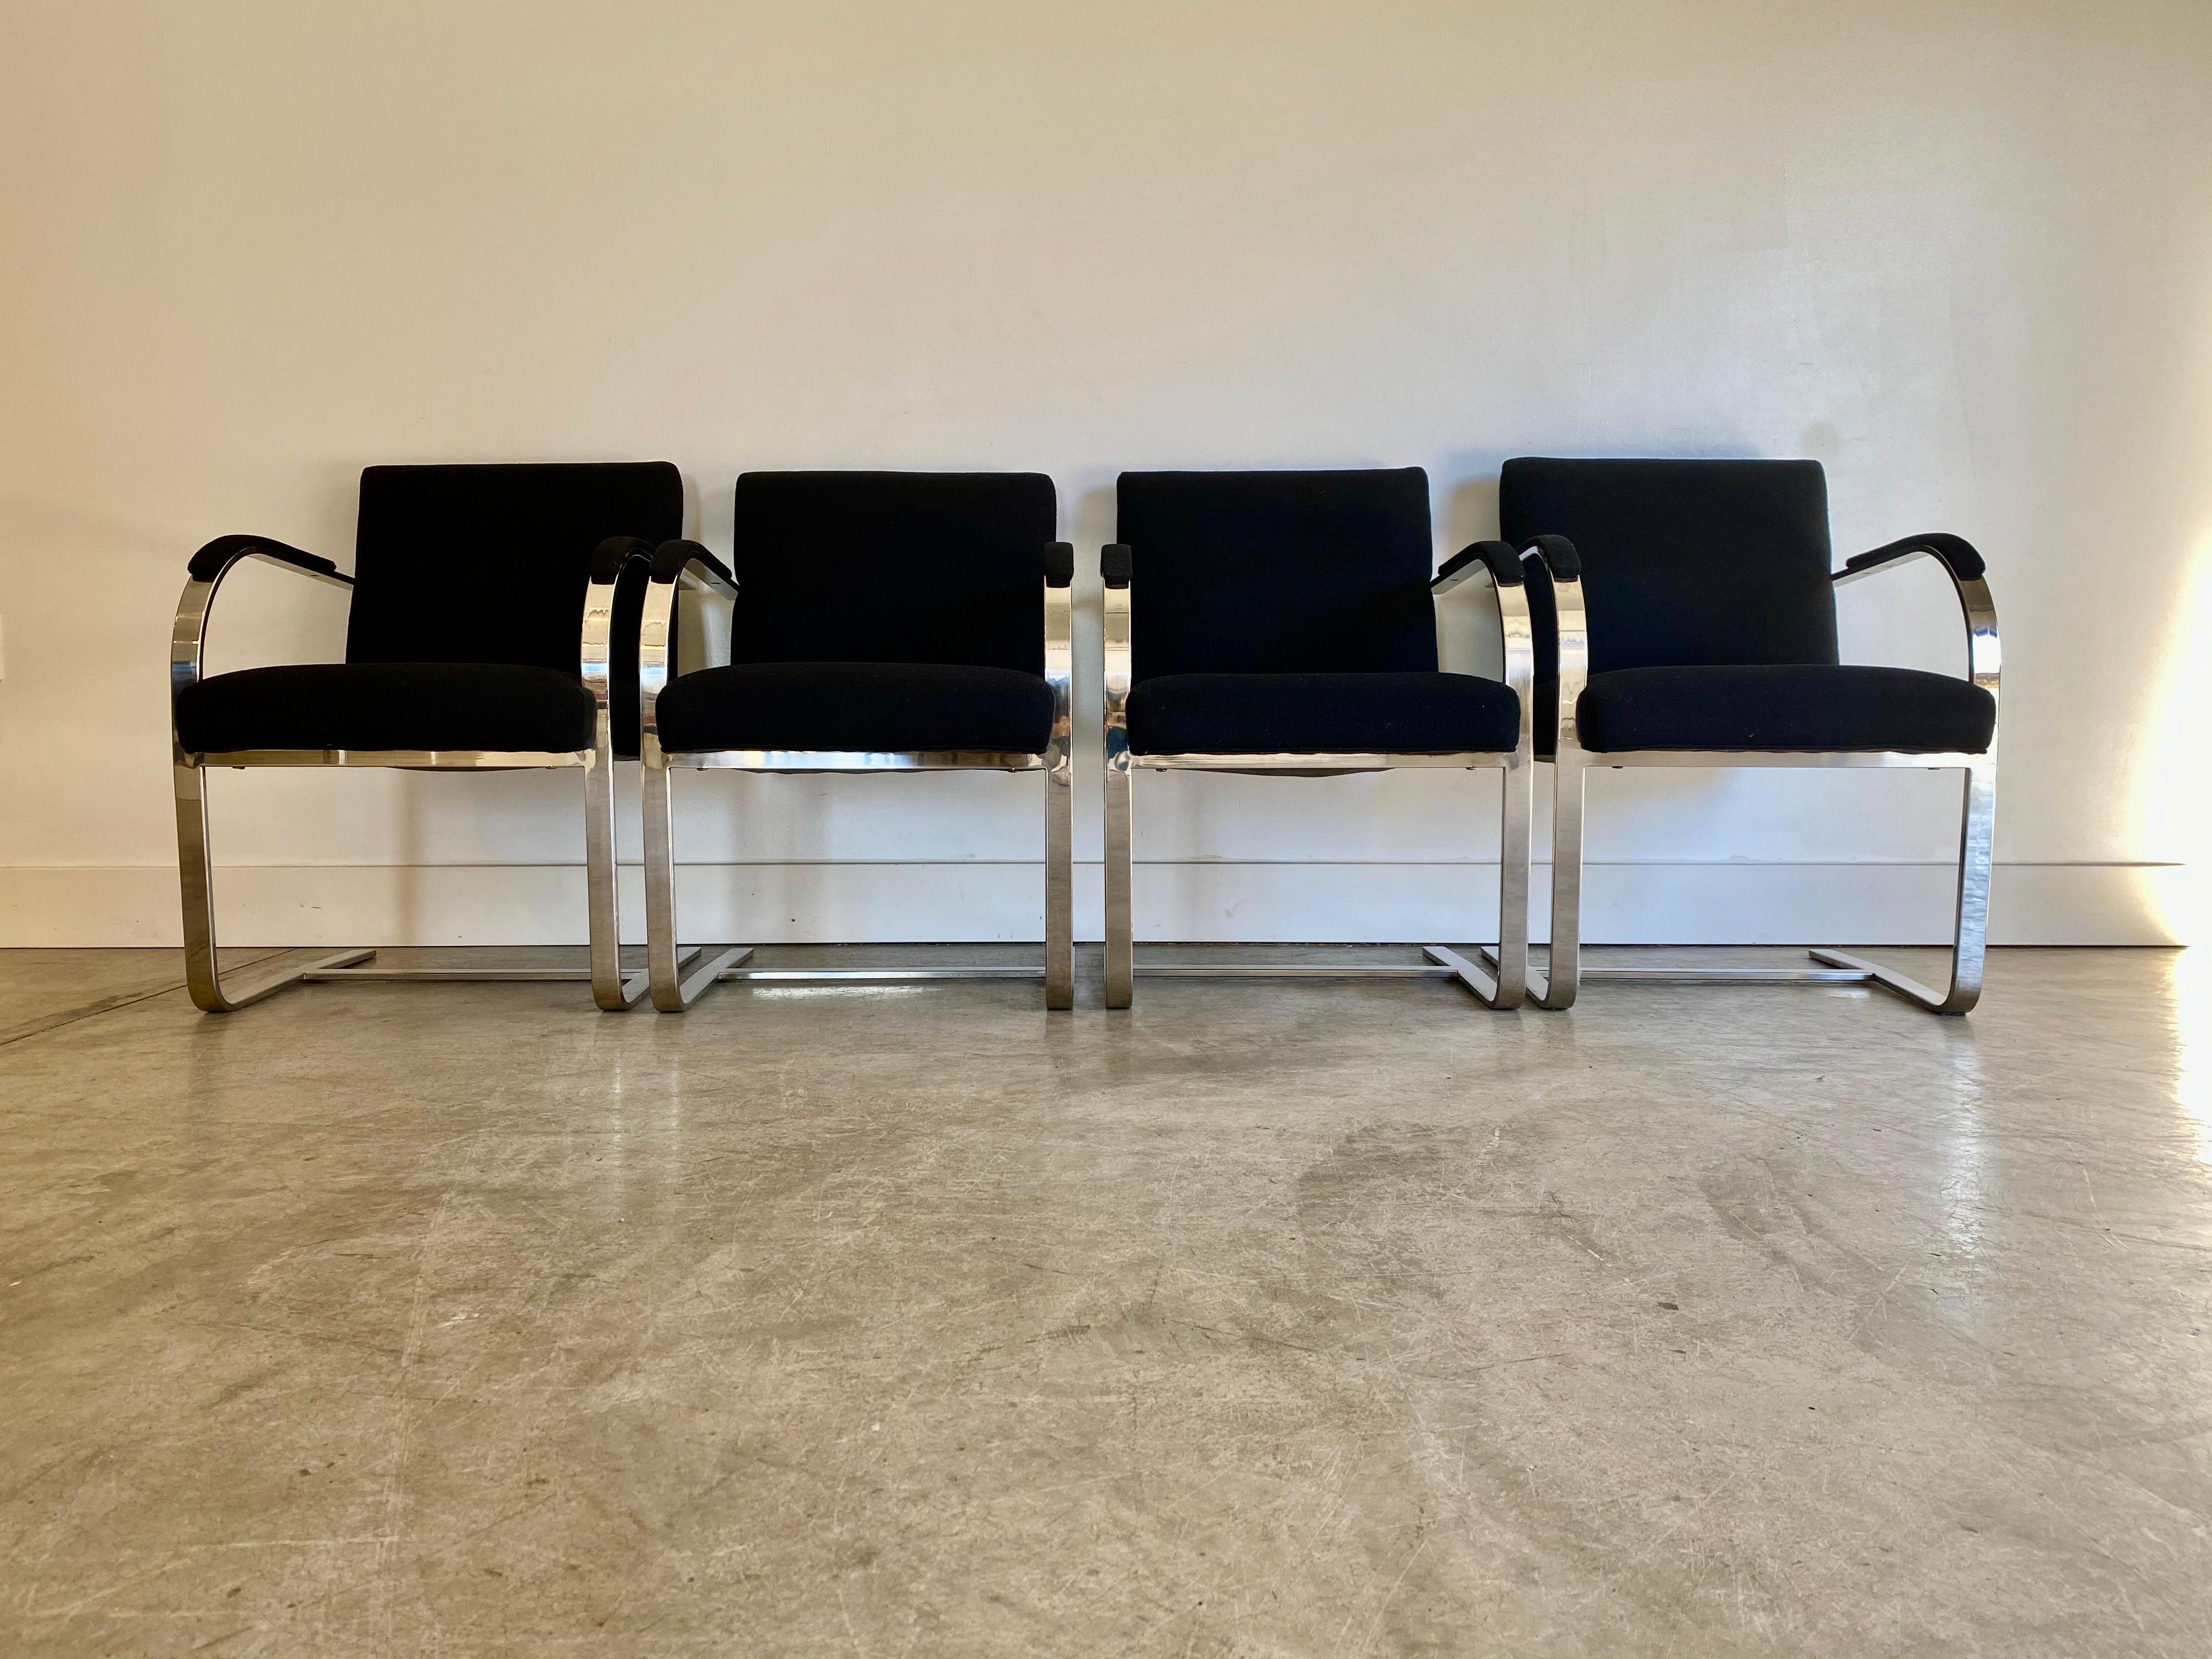 Designer: Mies van der Rohe
Manufacture: Knoll Period/style: midcentury
Country: US
Date: 1960s.